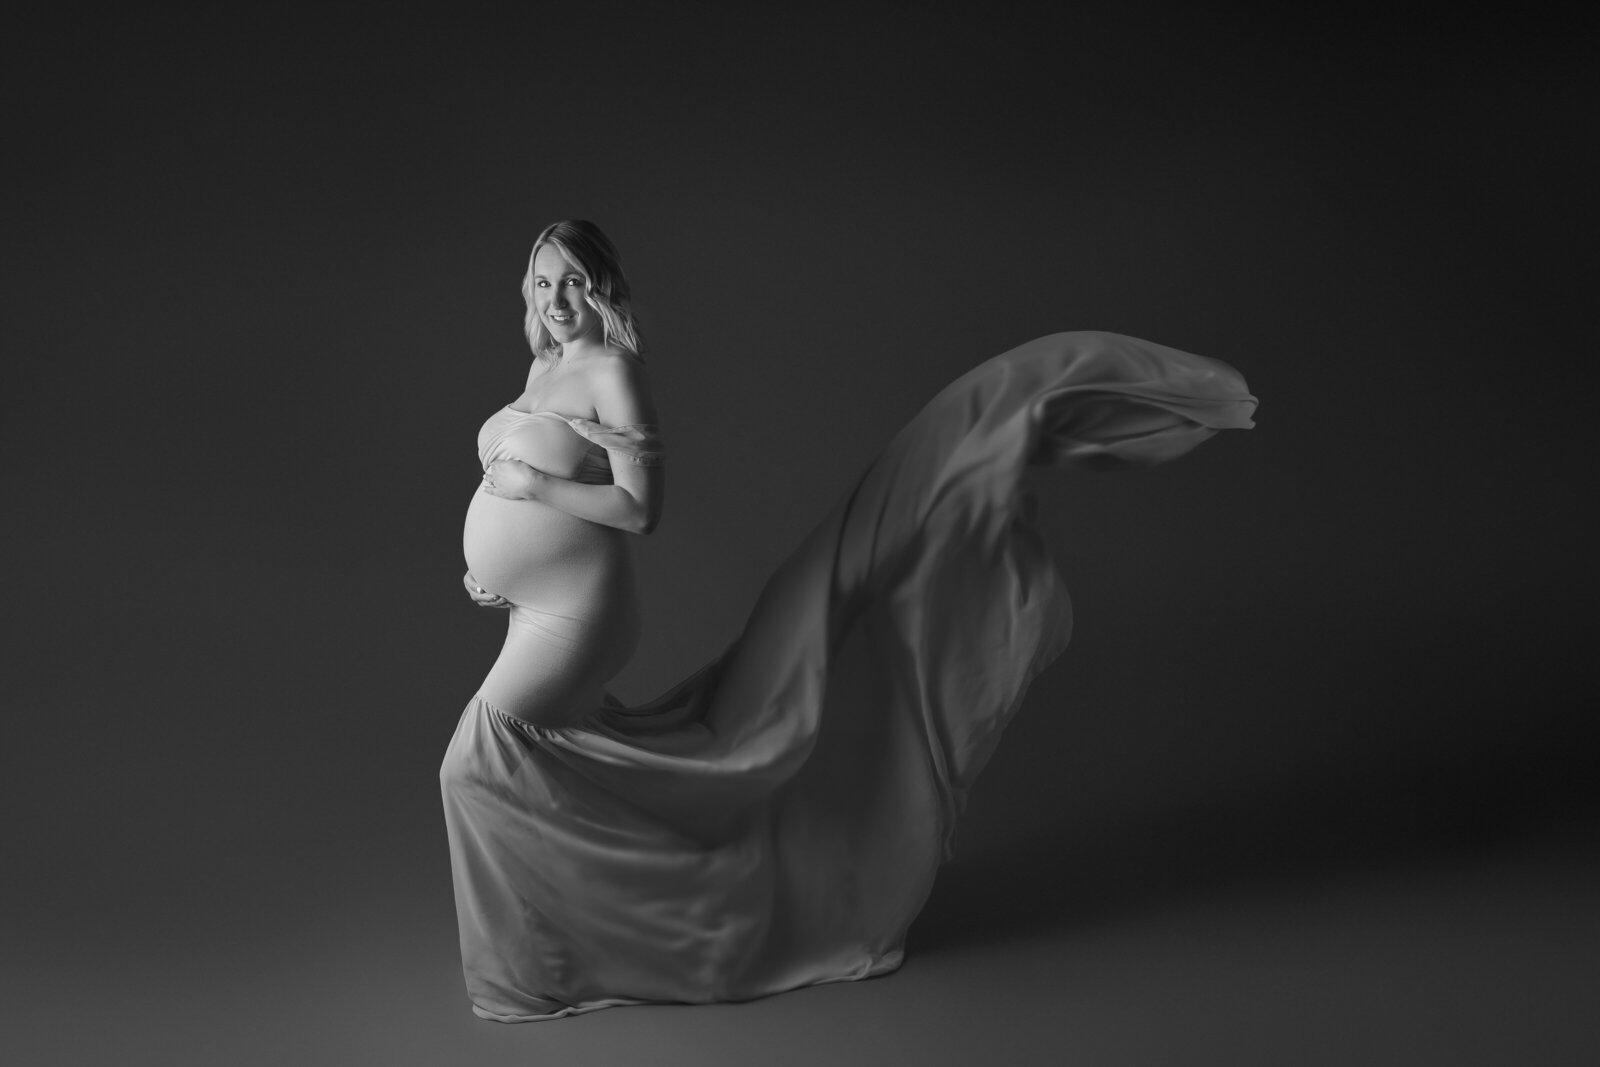 Fine art Maternity Photography Charlotte NC black and white portrait of a light skinned mom to be with light blonde hair, dress train flowing up behind her as if caught by wind.